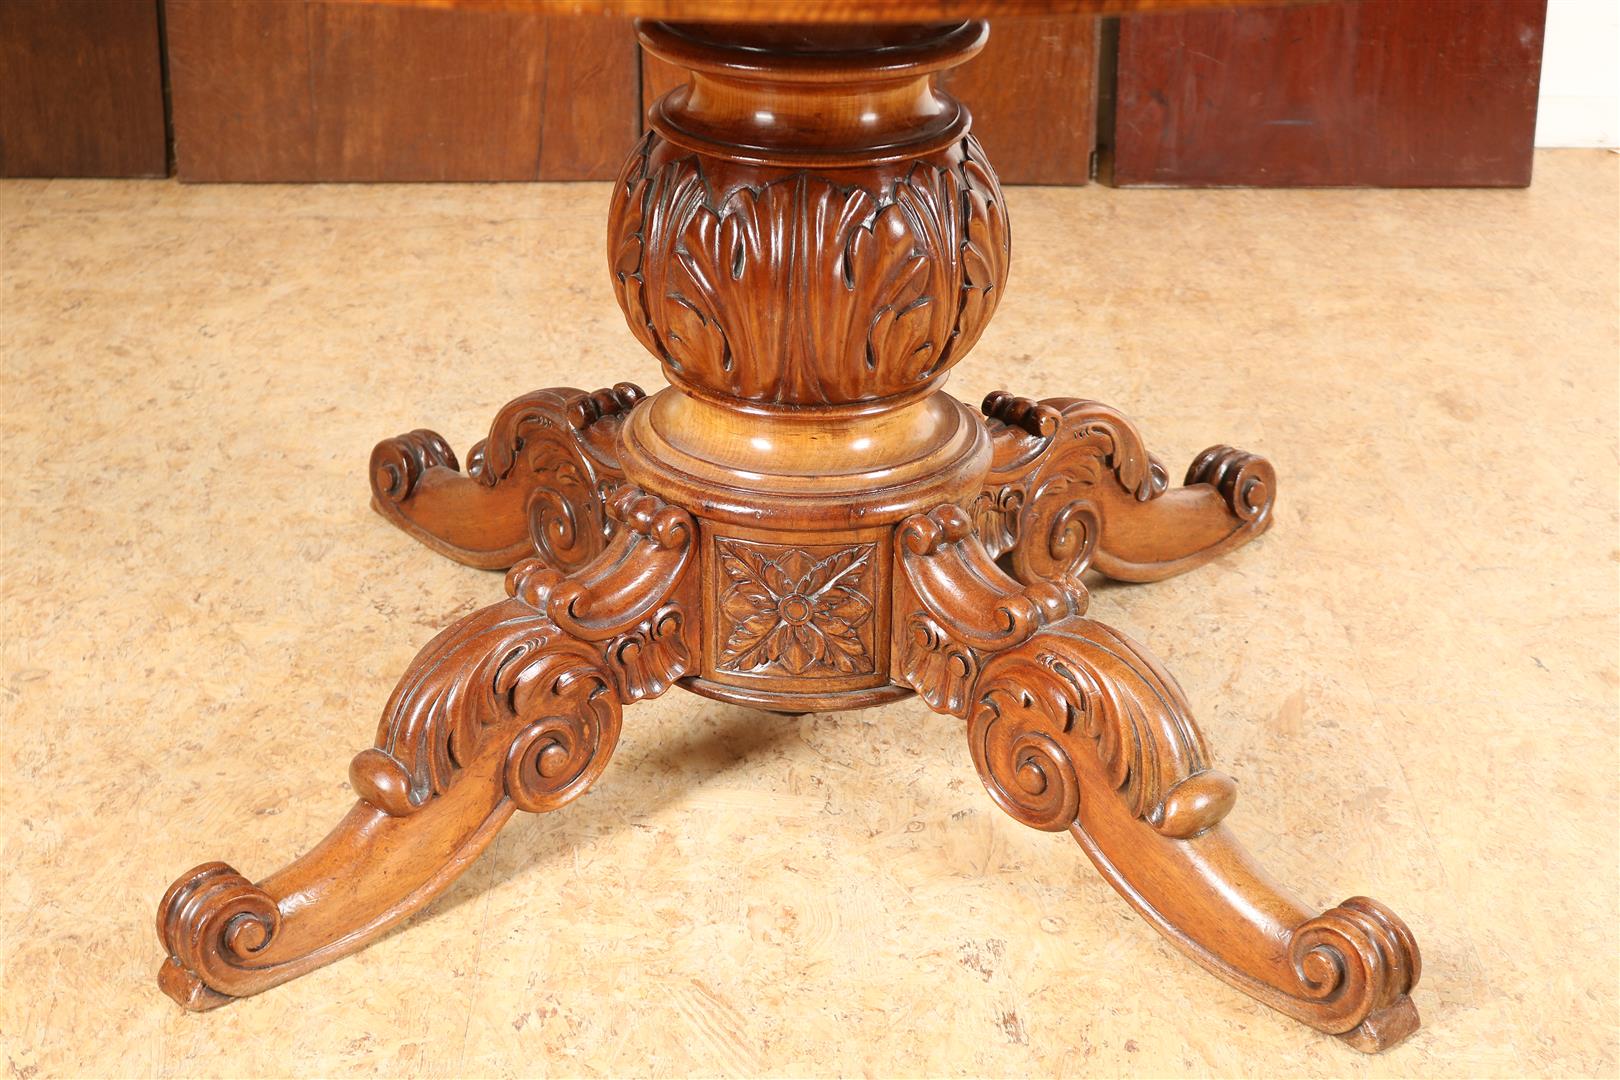 Mahogany Willem III wings table on carved flower leg ending in 4 branch, Holland, circa 1880, 75 x - Image 3 of 3